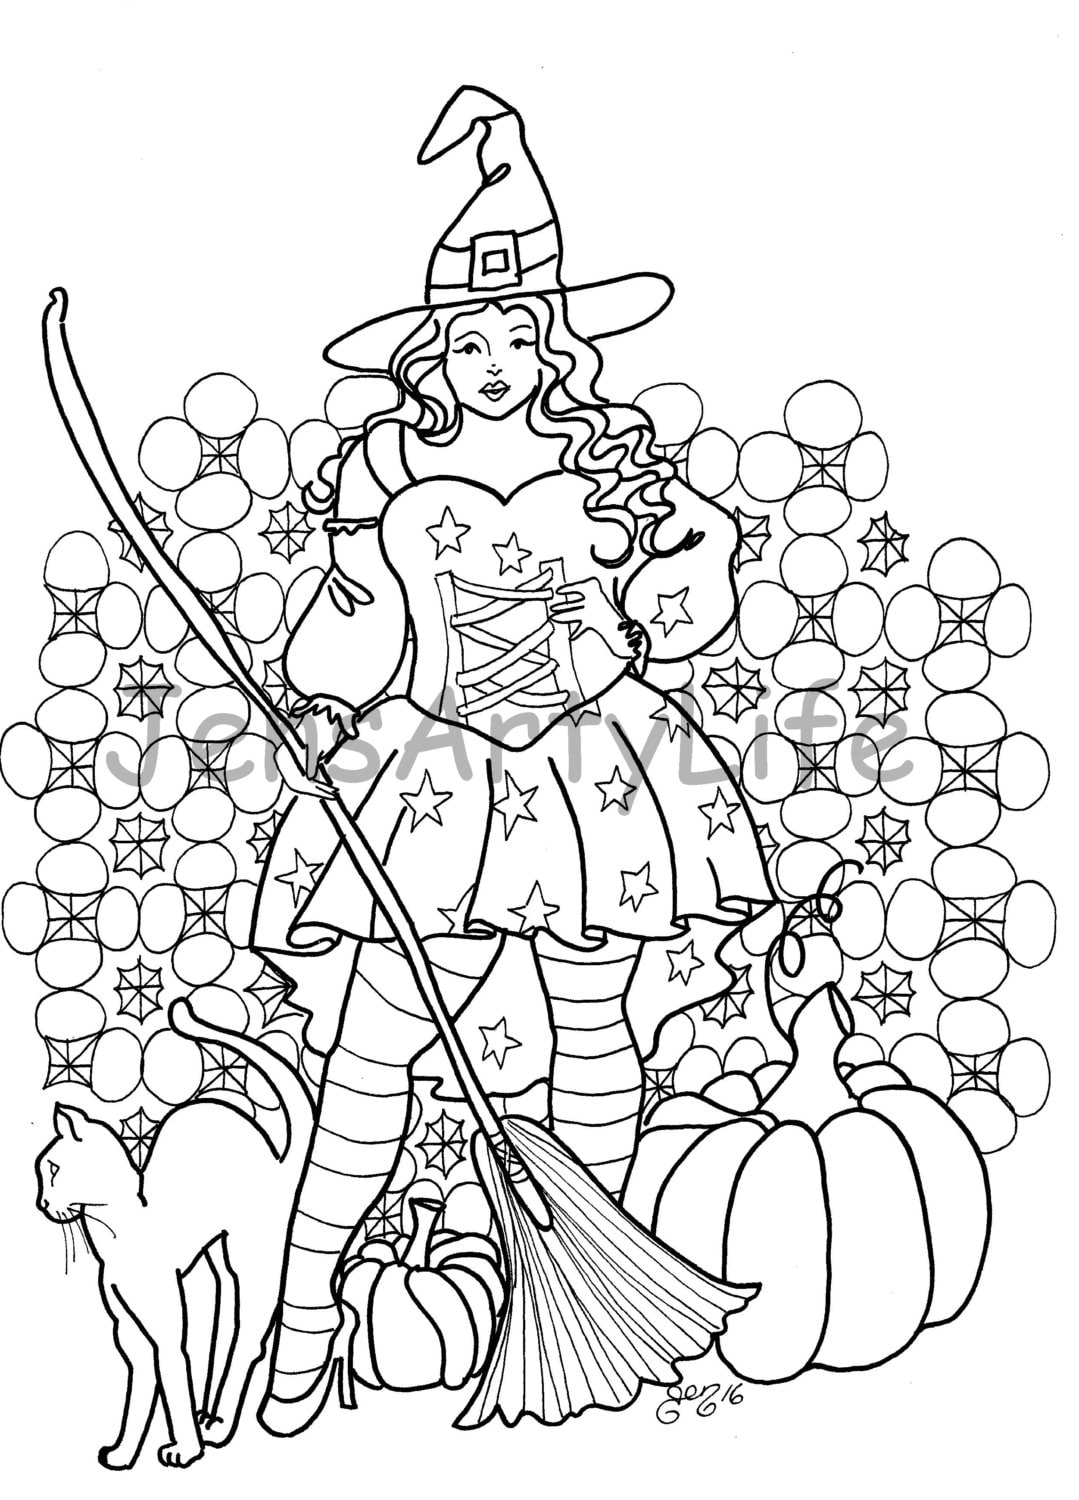 Download Corset Pattern Colouring Pages Sketch Coloring Page